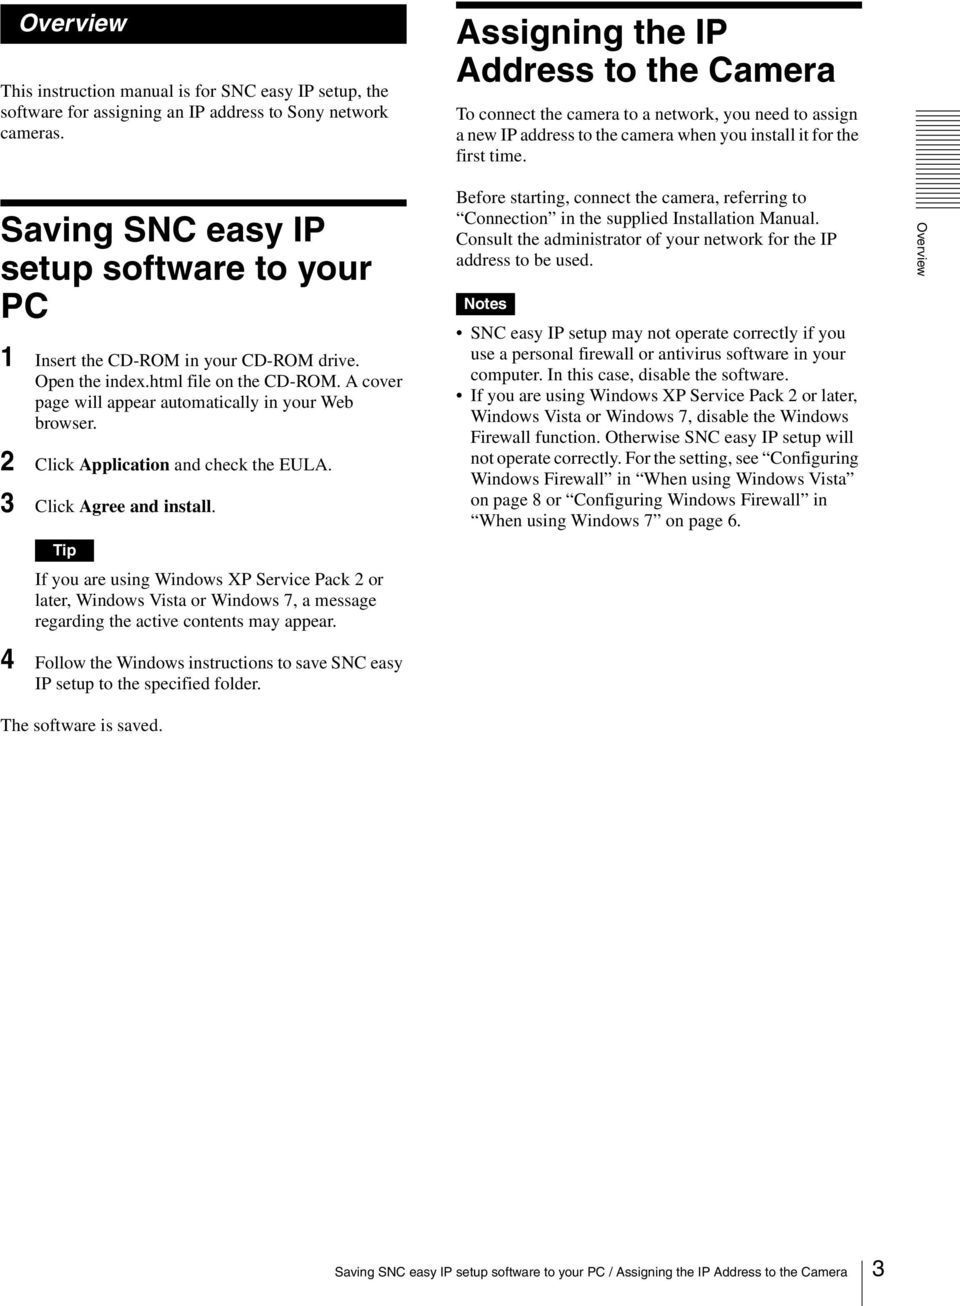 Saving SNC easy IP setup software to your PC 1 Insert the CD-ROM in your CD-ROM drive. Open the index.html file on the CD-ROM. A cover page will appear automatically in your Web browser.